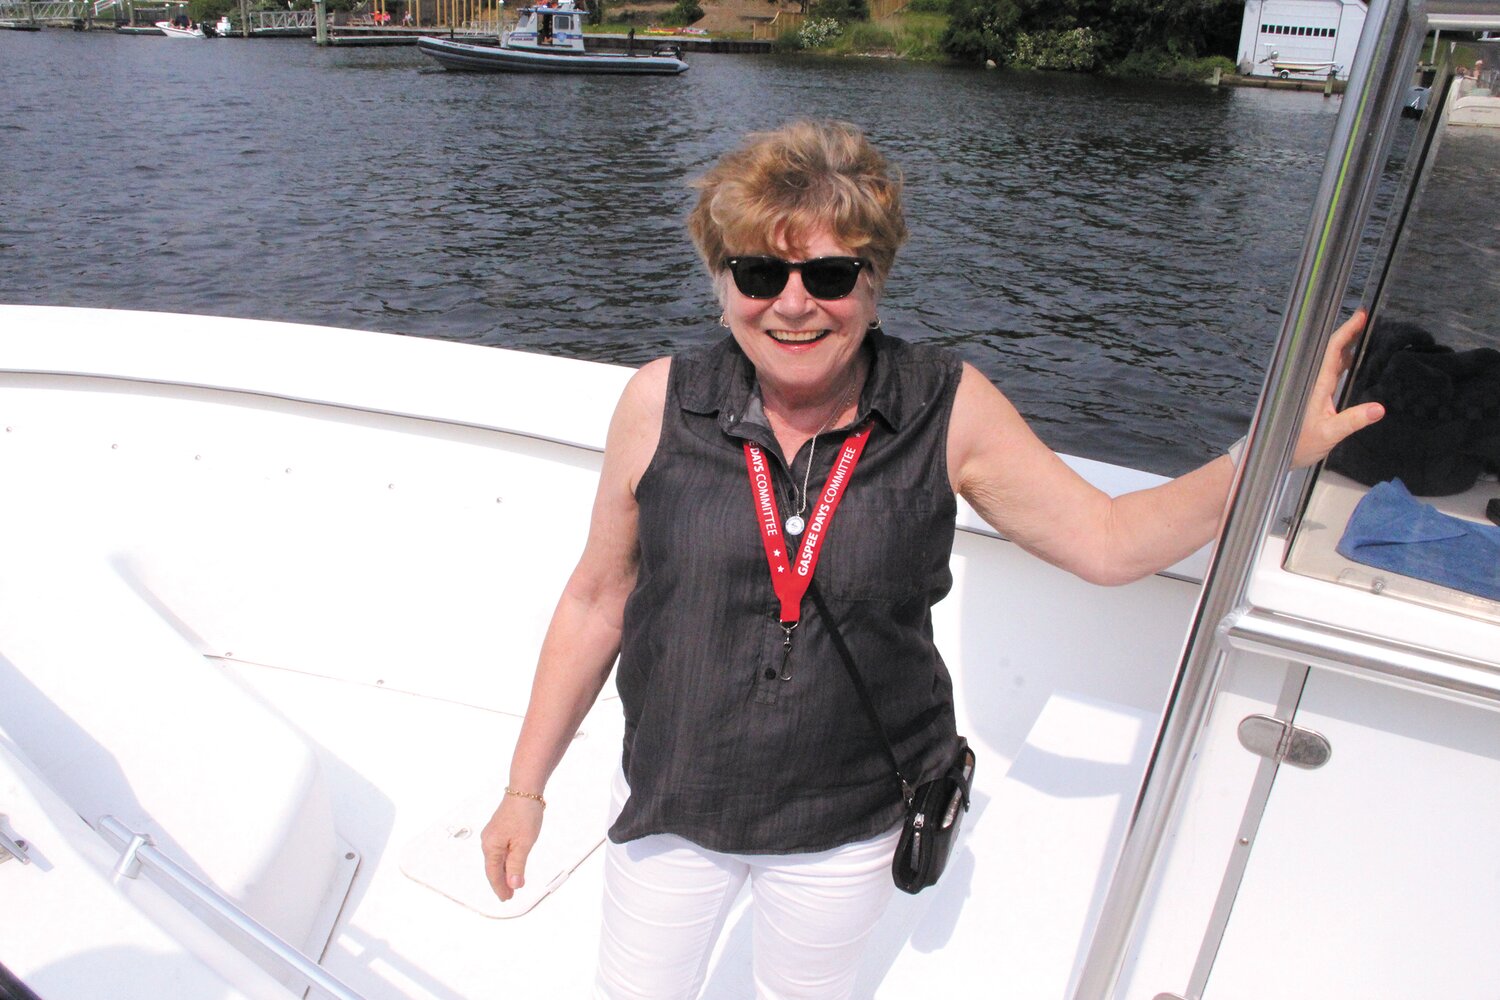 READY FOR A BlazE:  Gaspee Days parade chair Janel Russell accompanied Warwick harbormasters as they set off Sunday to set fire to the Gaspee in Pawtuxet Cove. She forgot to bring matches, but the harbormasters had flares. (Cranston Herald photo)